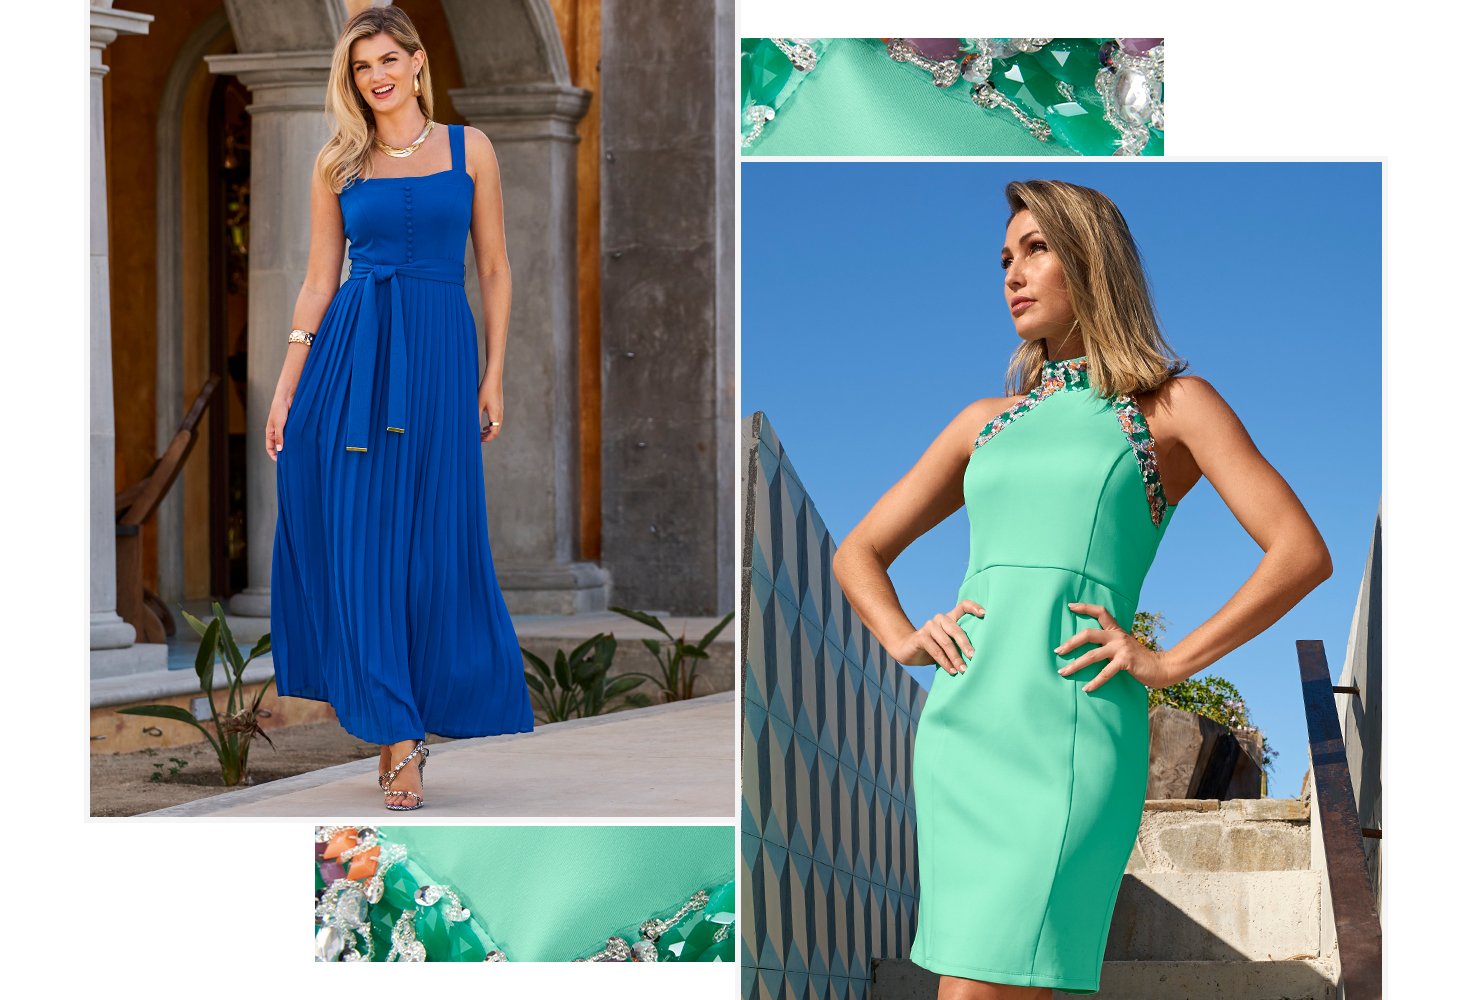 Models are wearing blue dresses. One is a royal blue dress with flowy skirt. The other is a turquoise high neck with crystal embellishments.